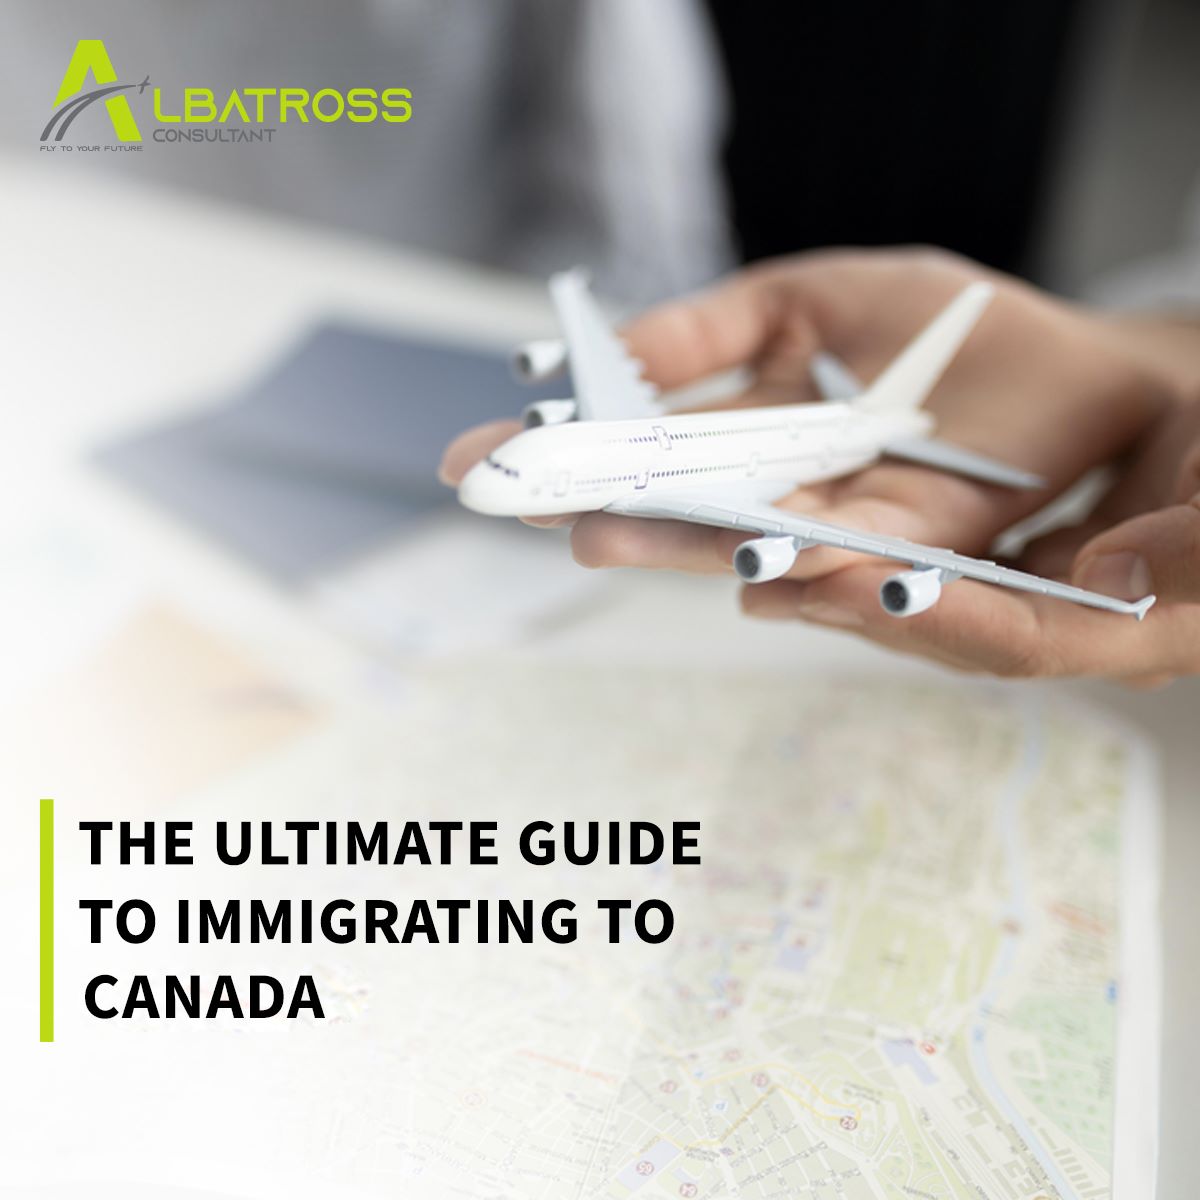 The Ultimate Guide to Immigrating to Canada